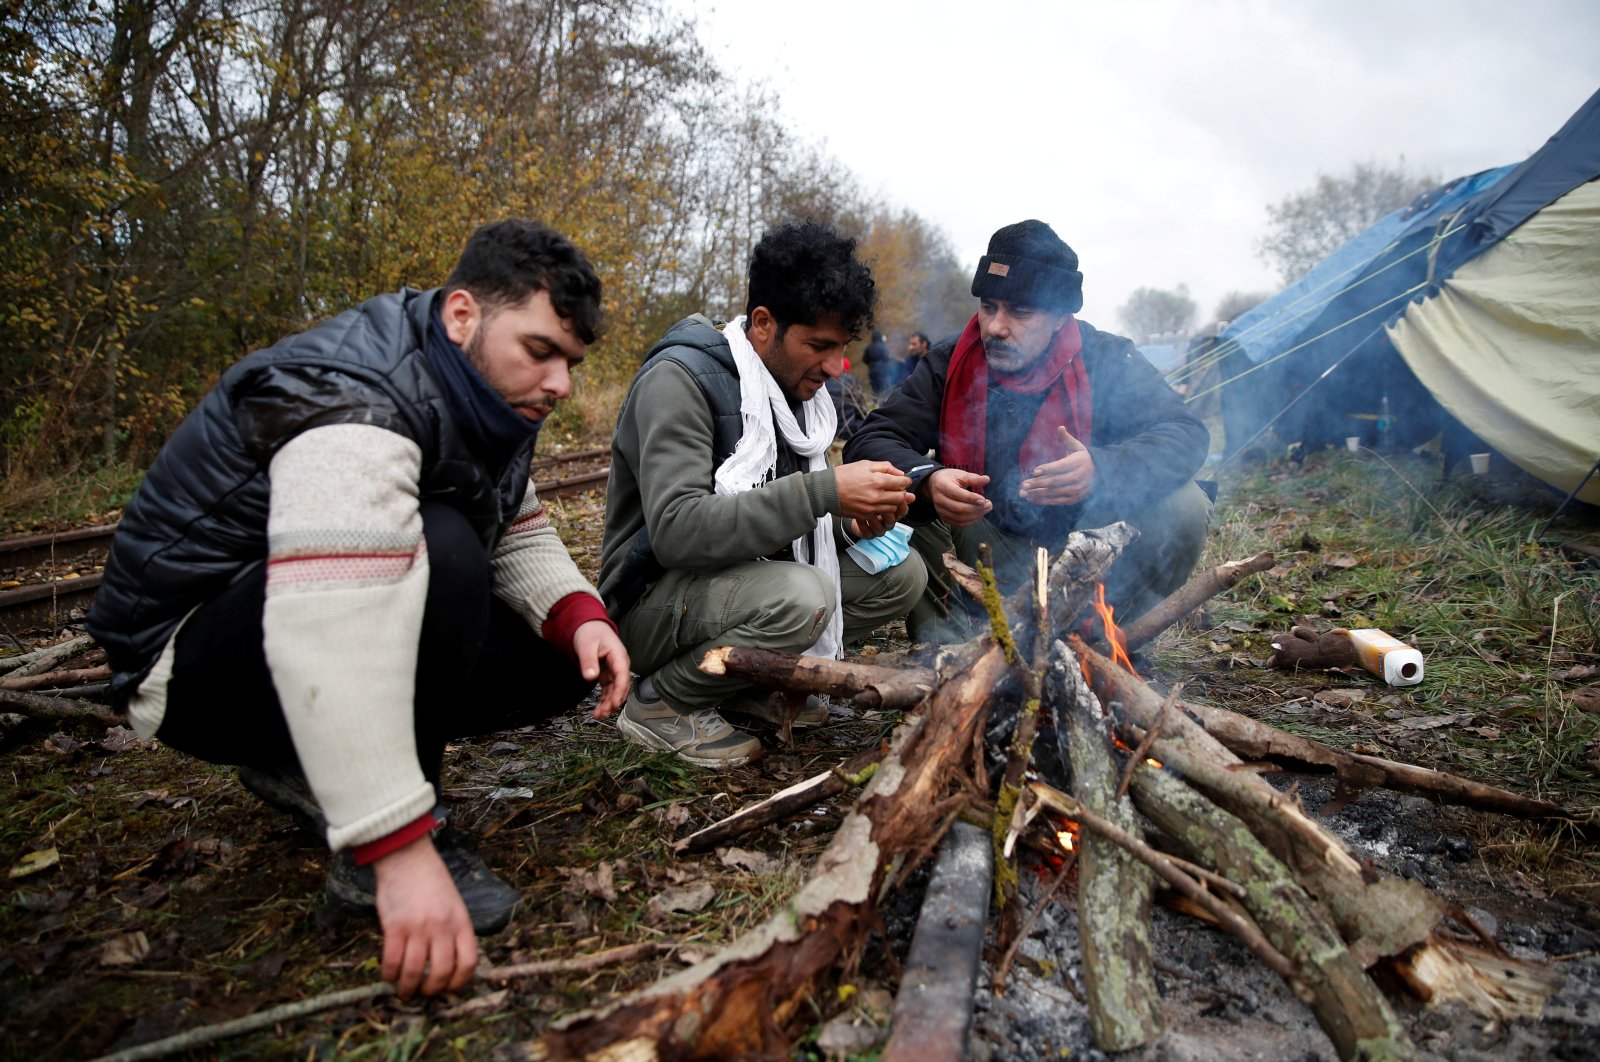 Migrants sit near a wood fire at a makeshift migrant camp in Loon Beach, the day after 31 migrants died when their dinghy deflated as they attempted to cross the English Channel, in Dunkirk, near Calais, France, Nov. 25, 2021. (Reuters Photo)